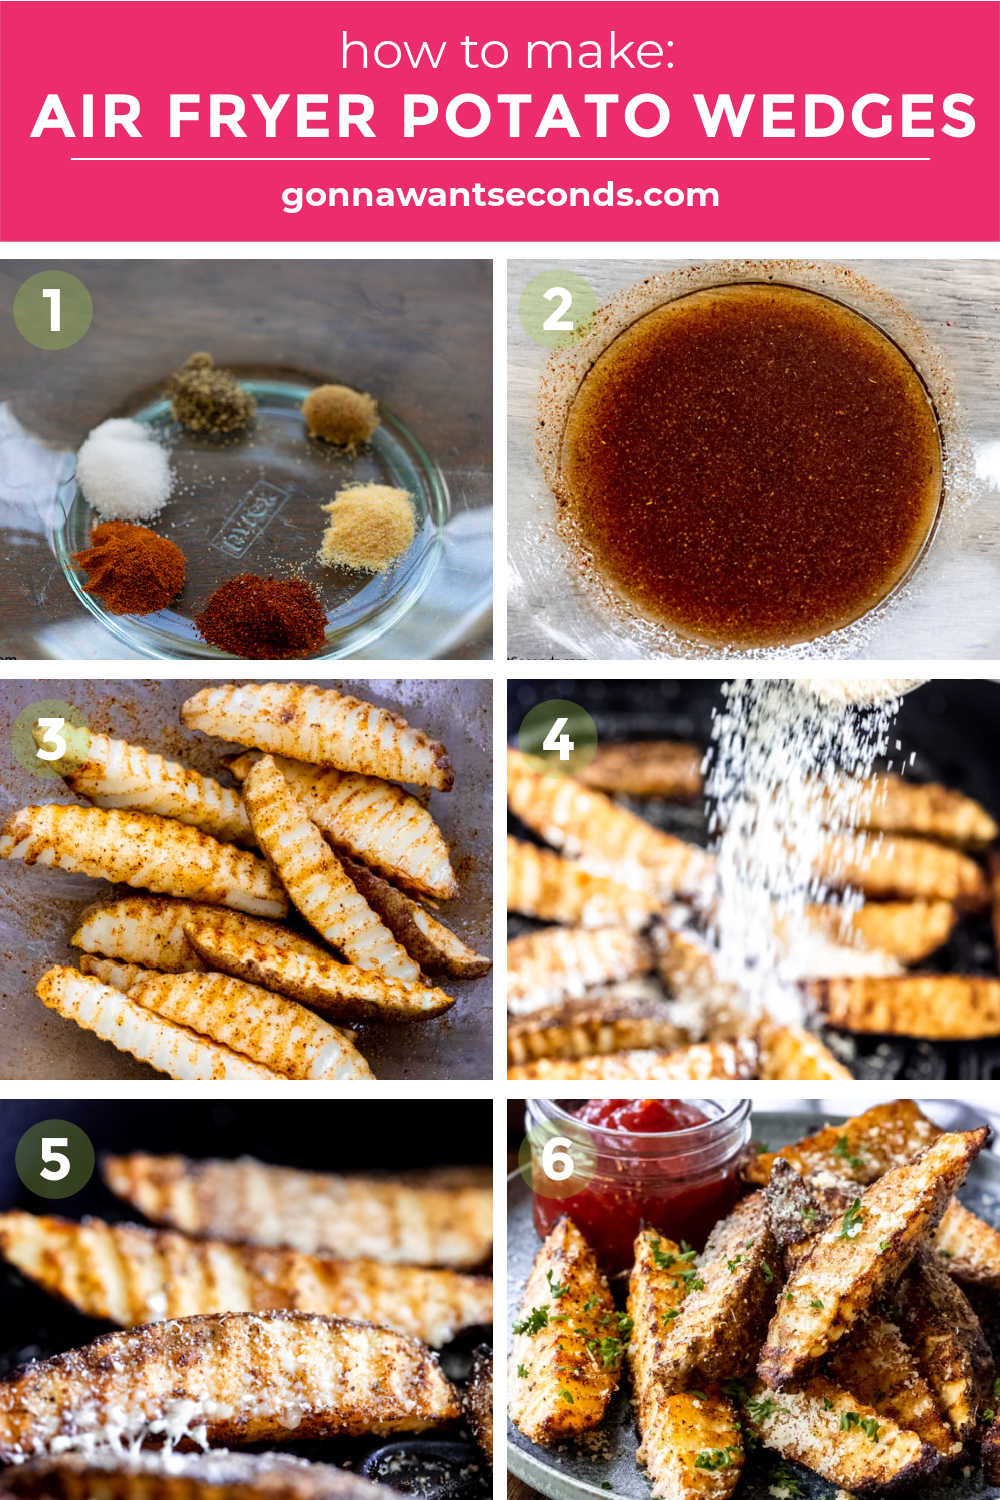 Step by step how to make air fryer potato wedges